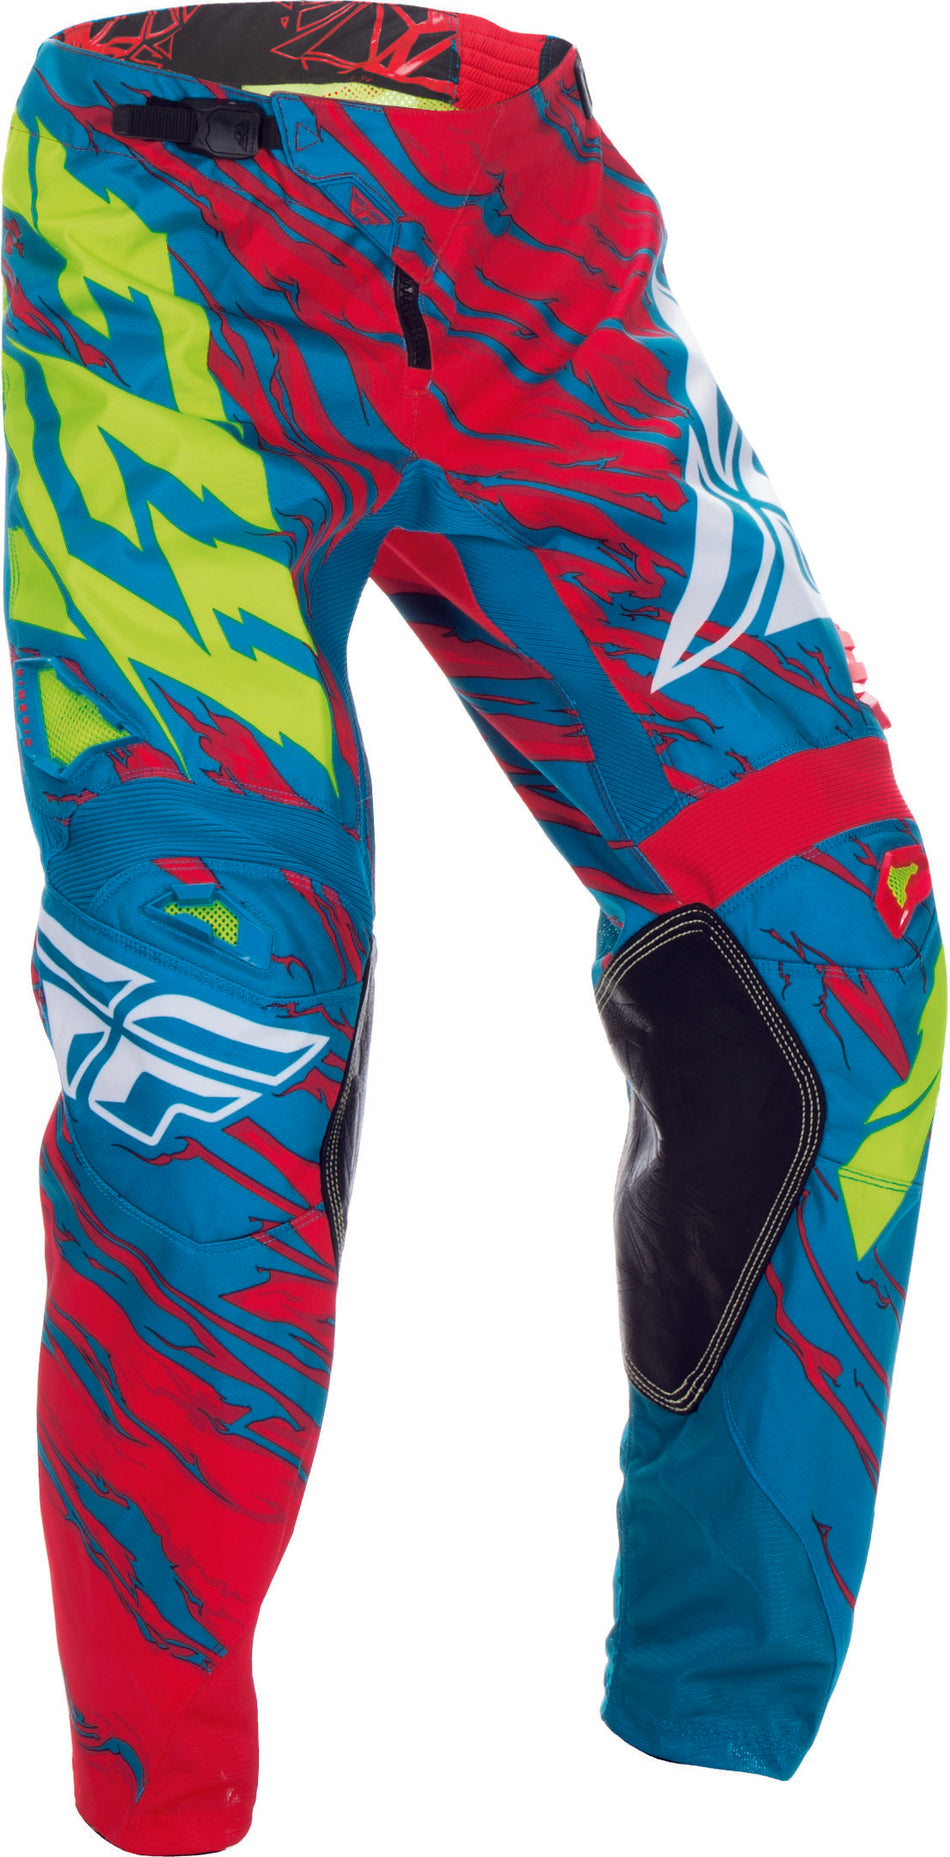 FLY RACING Kinetic Relapse Pant Teal/Red Sz 32 370-43932